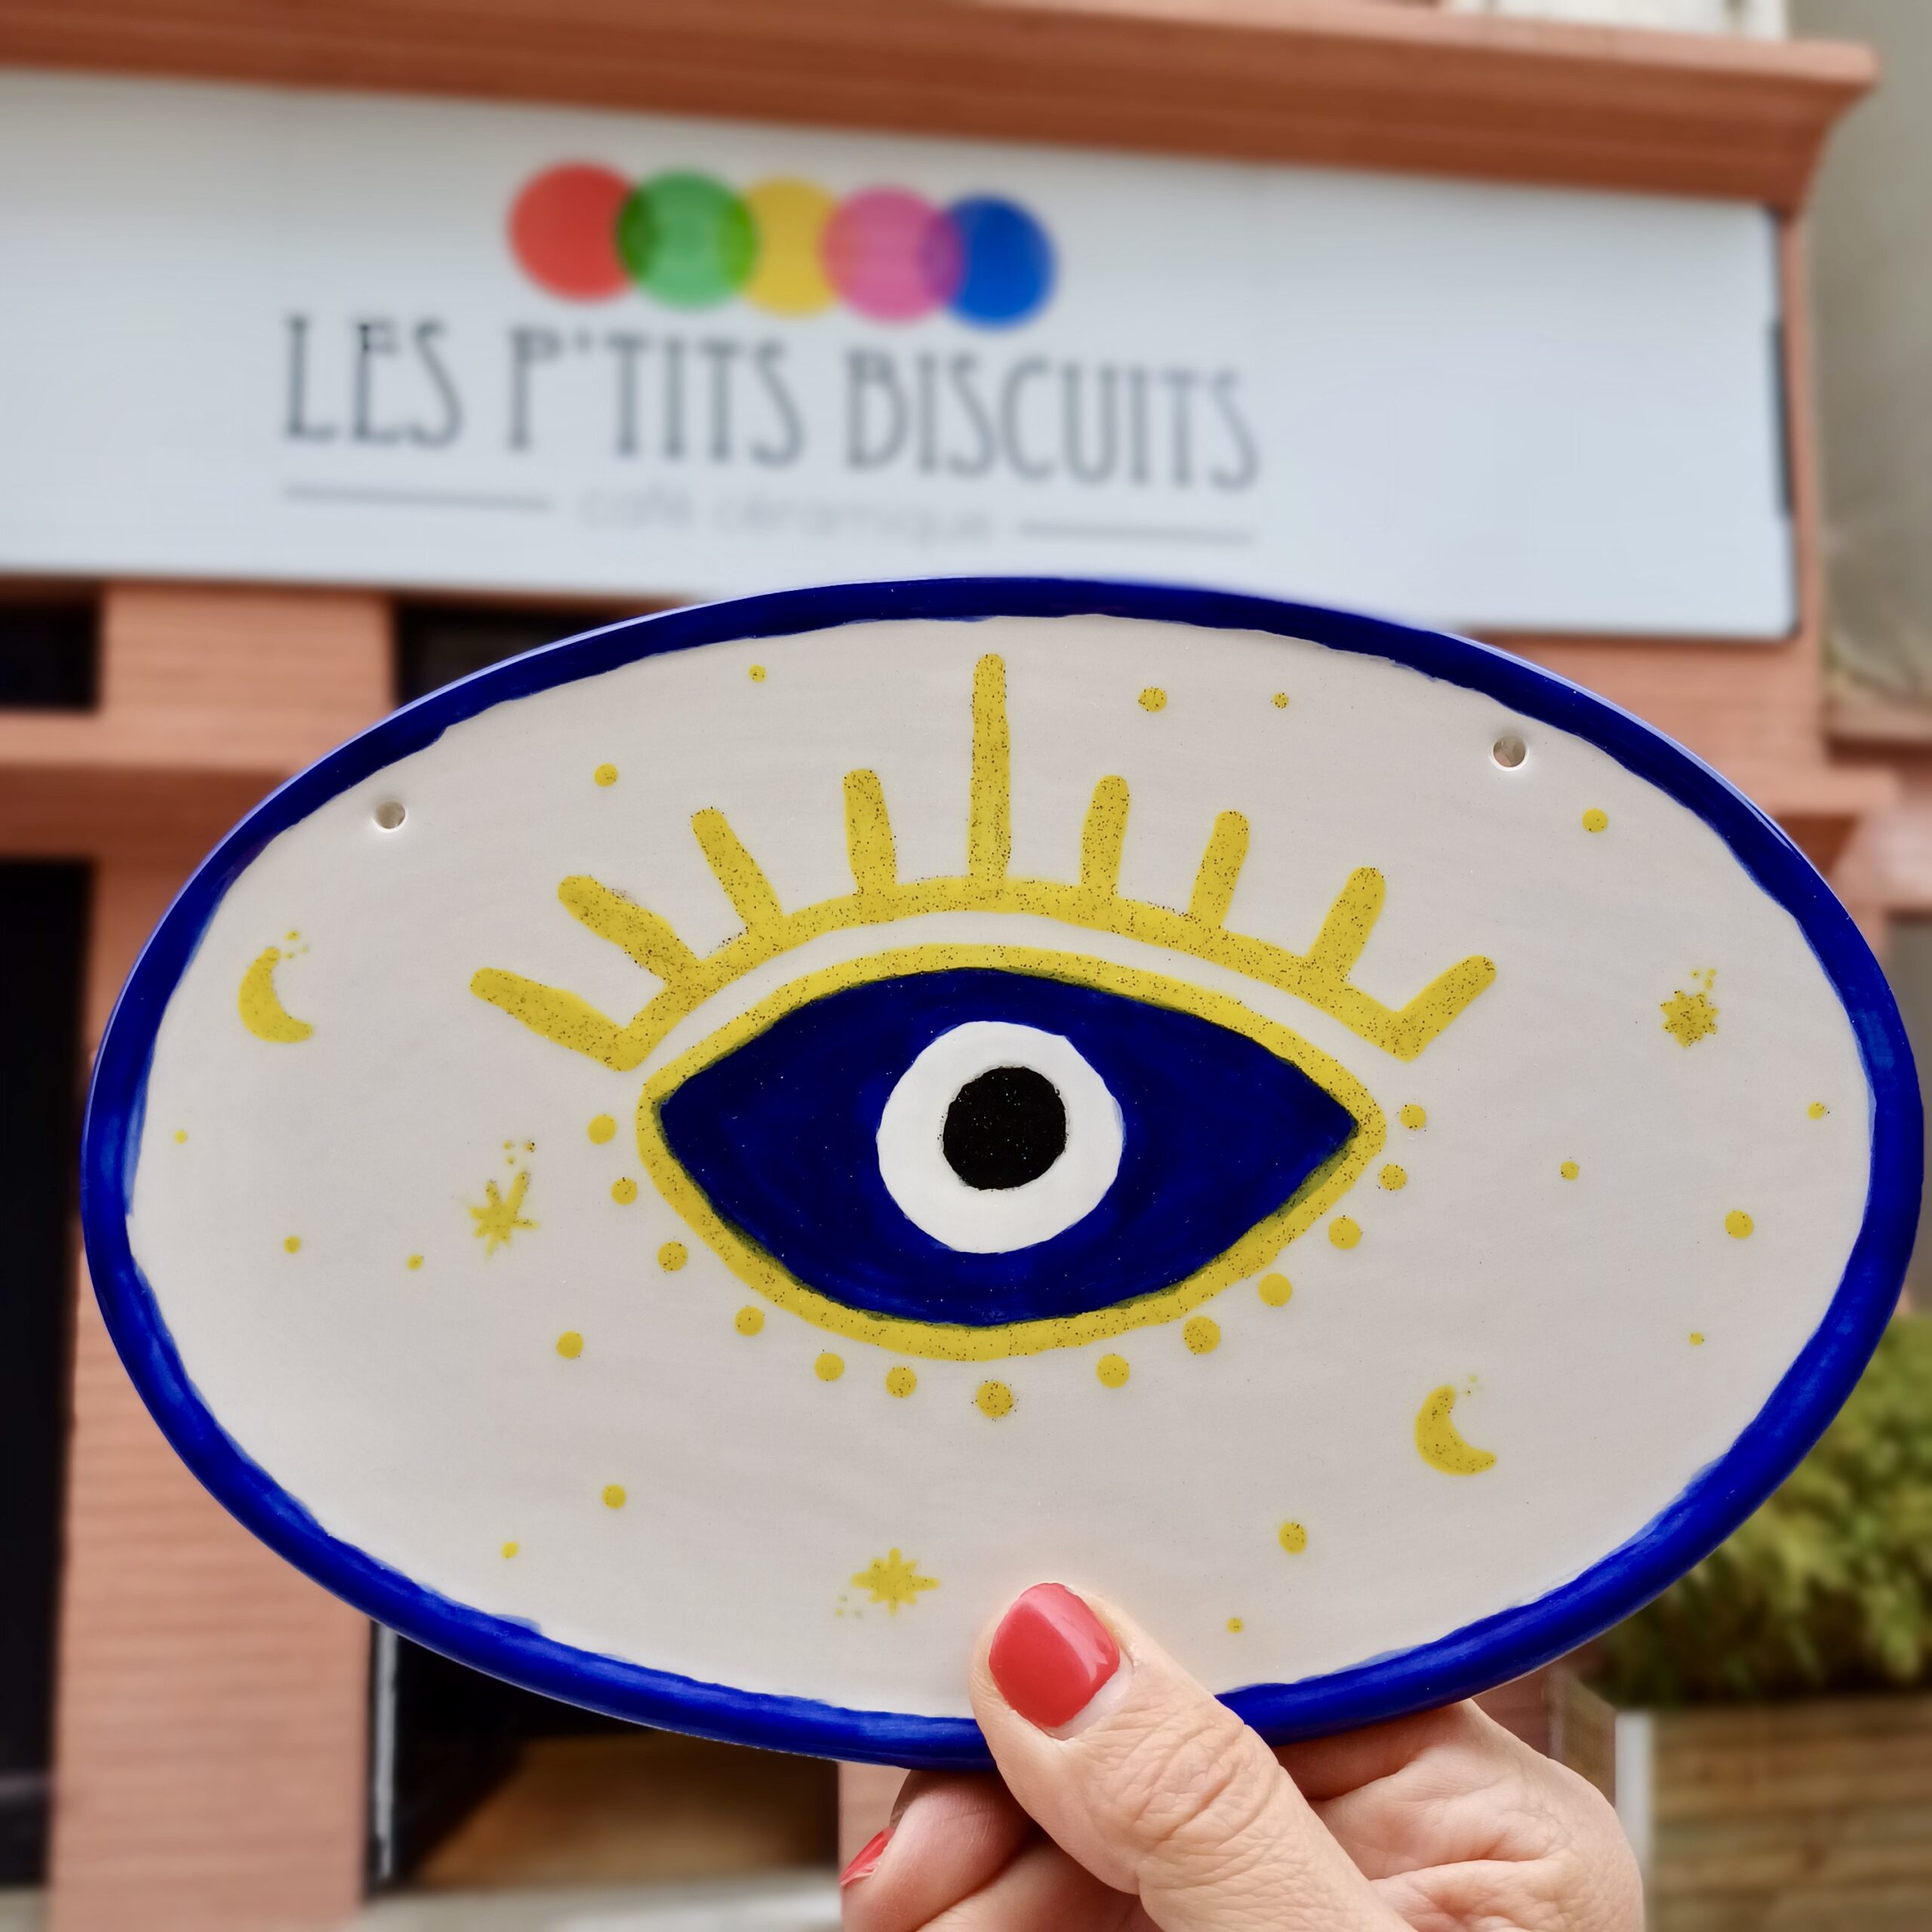 Les P'tits Biscuits - Galerie Photos